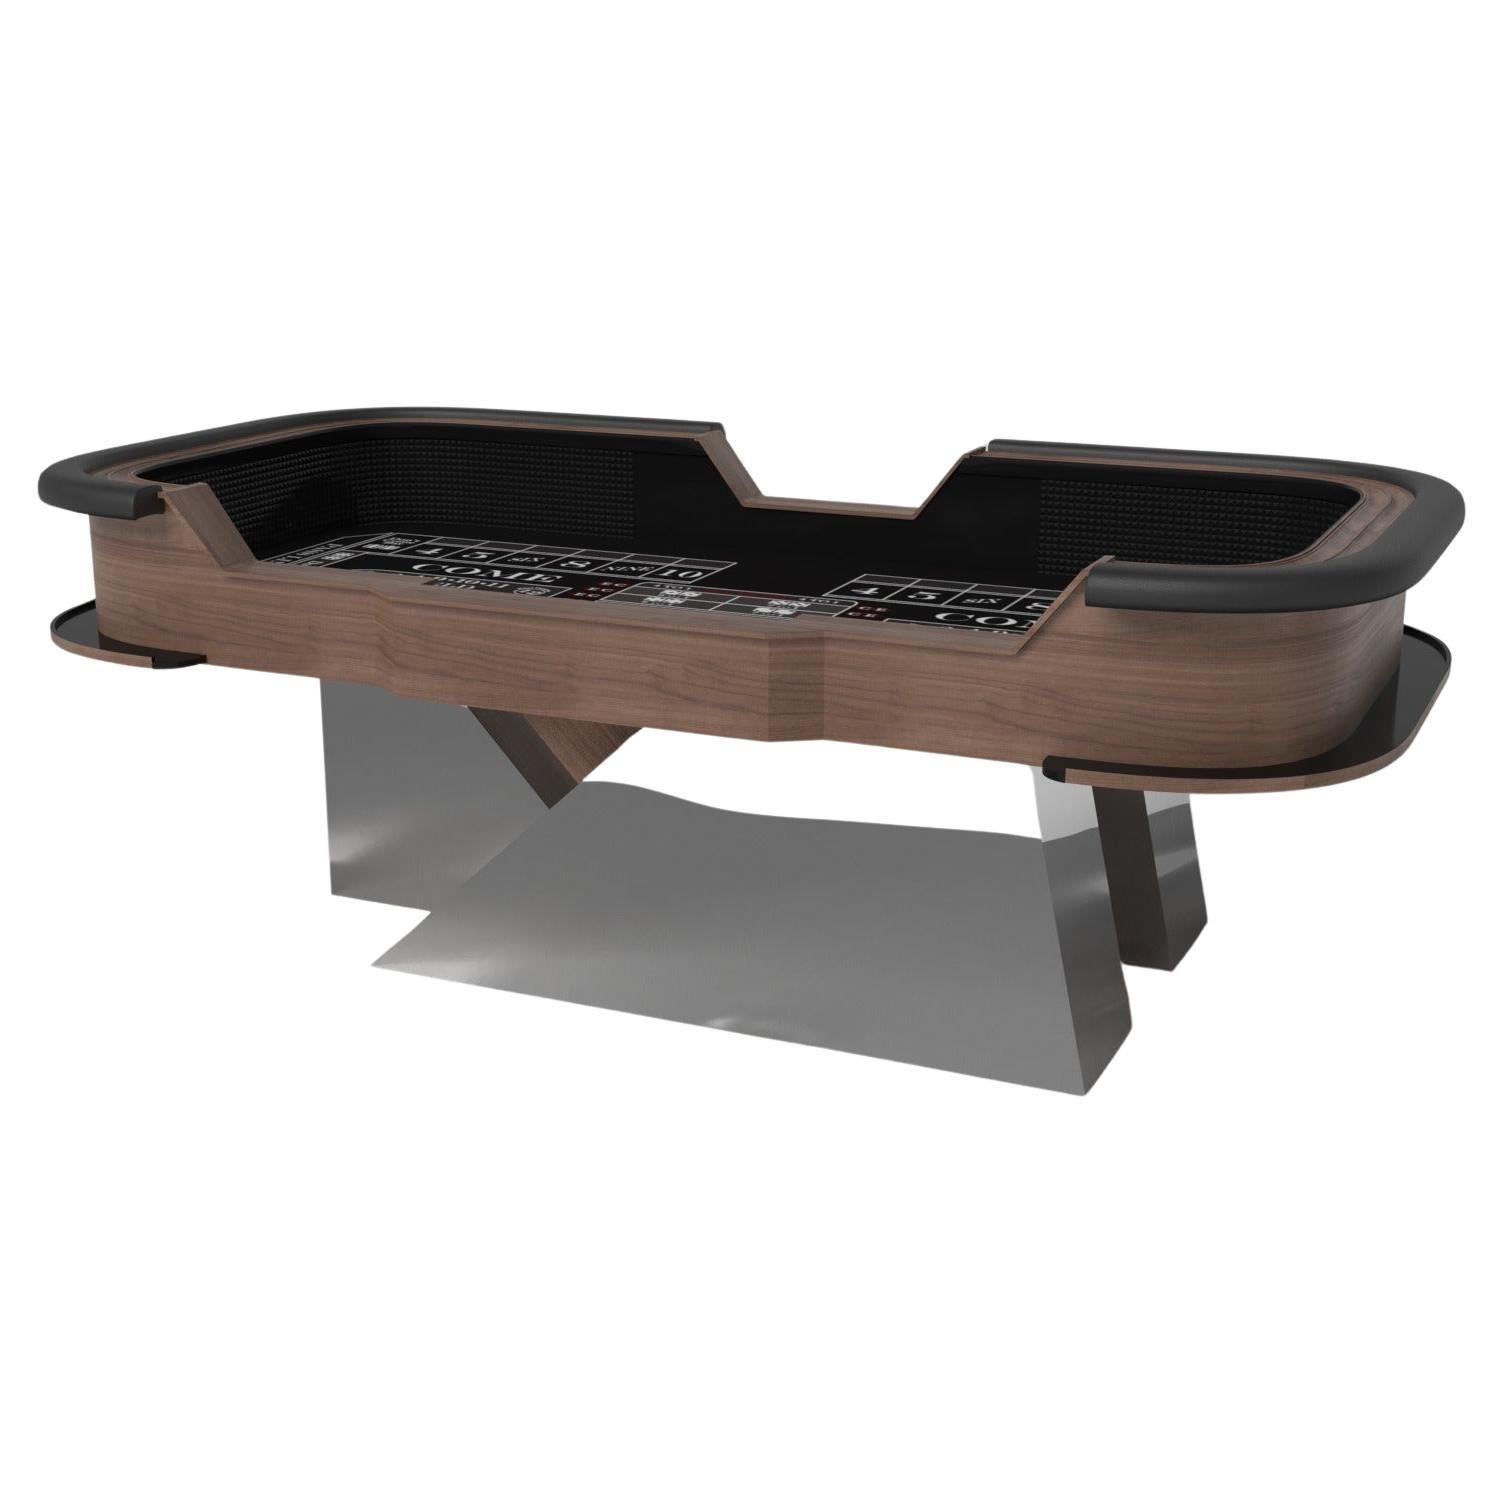 Elevate Customs Stilt Craps Tables / Solid Walnut Wood in 9'9" - Made in USA